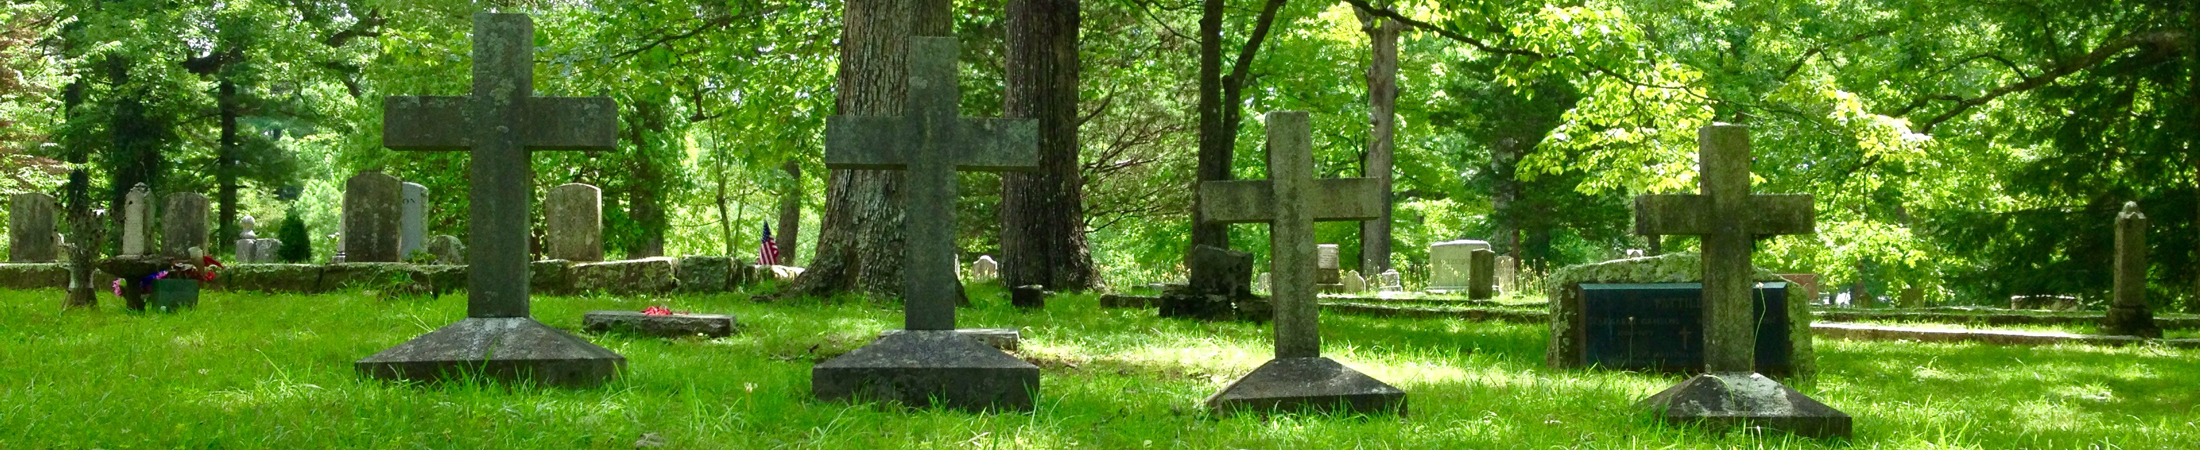 Row of crosses marking graves in cemetery